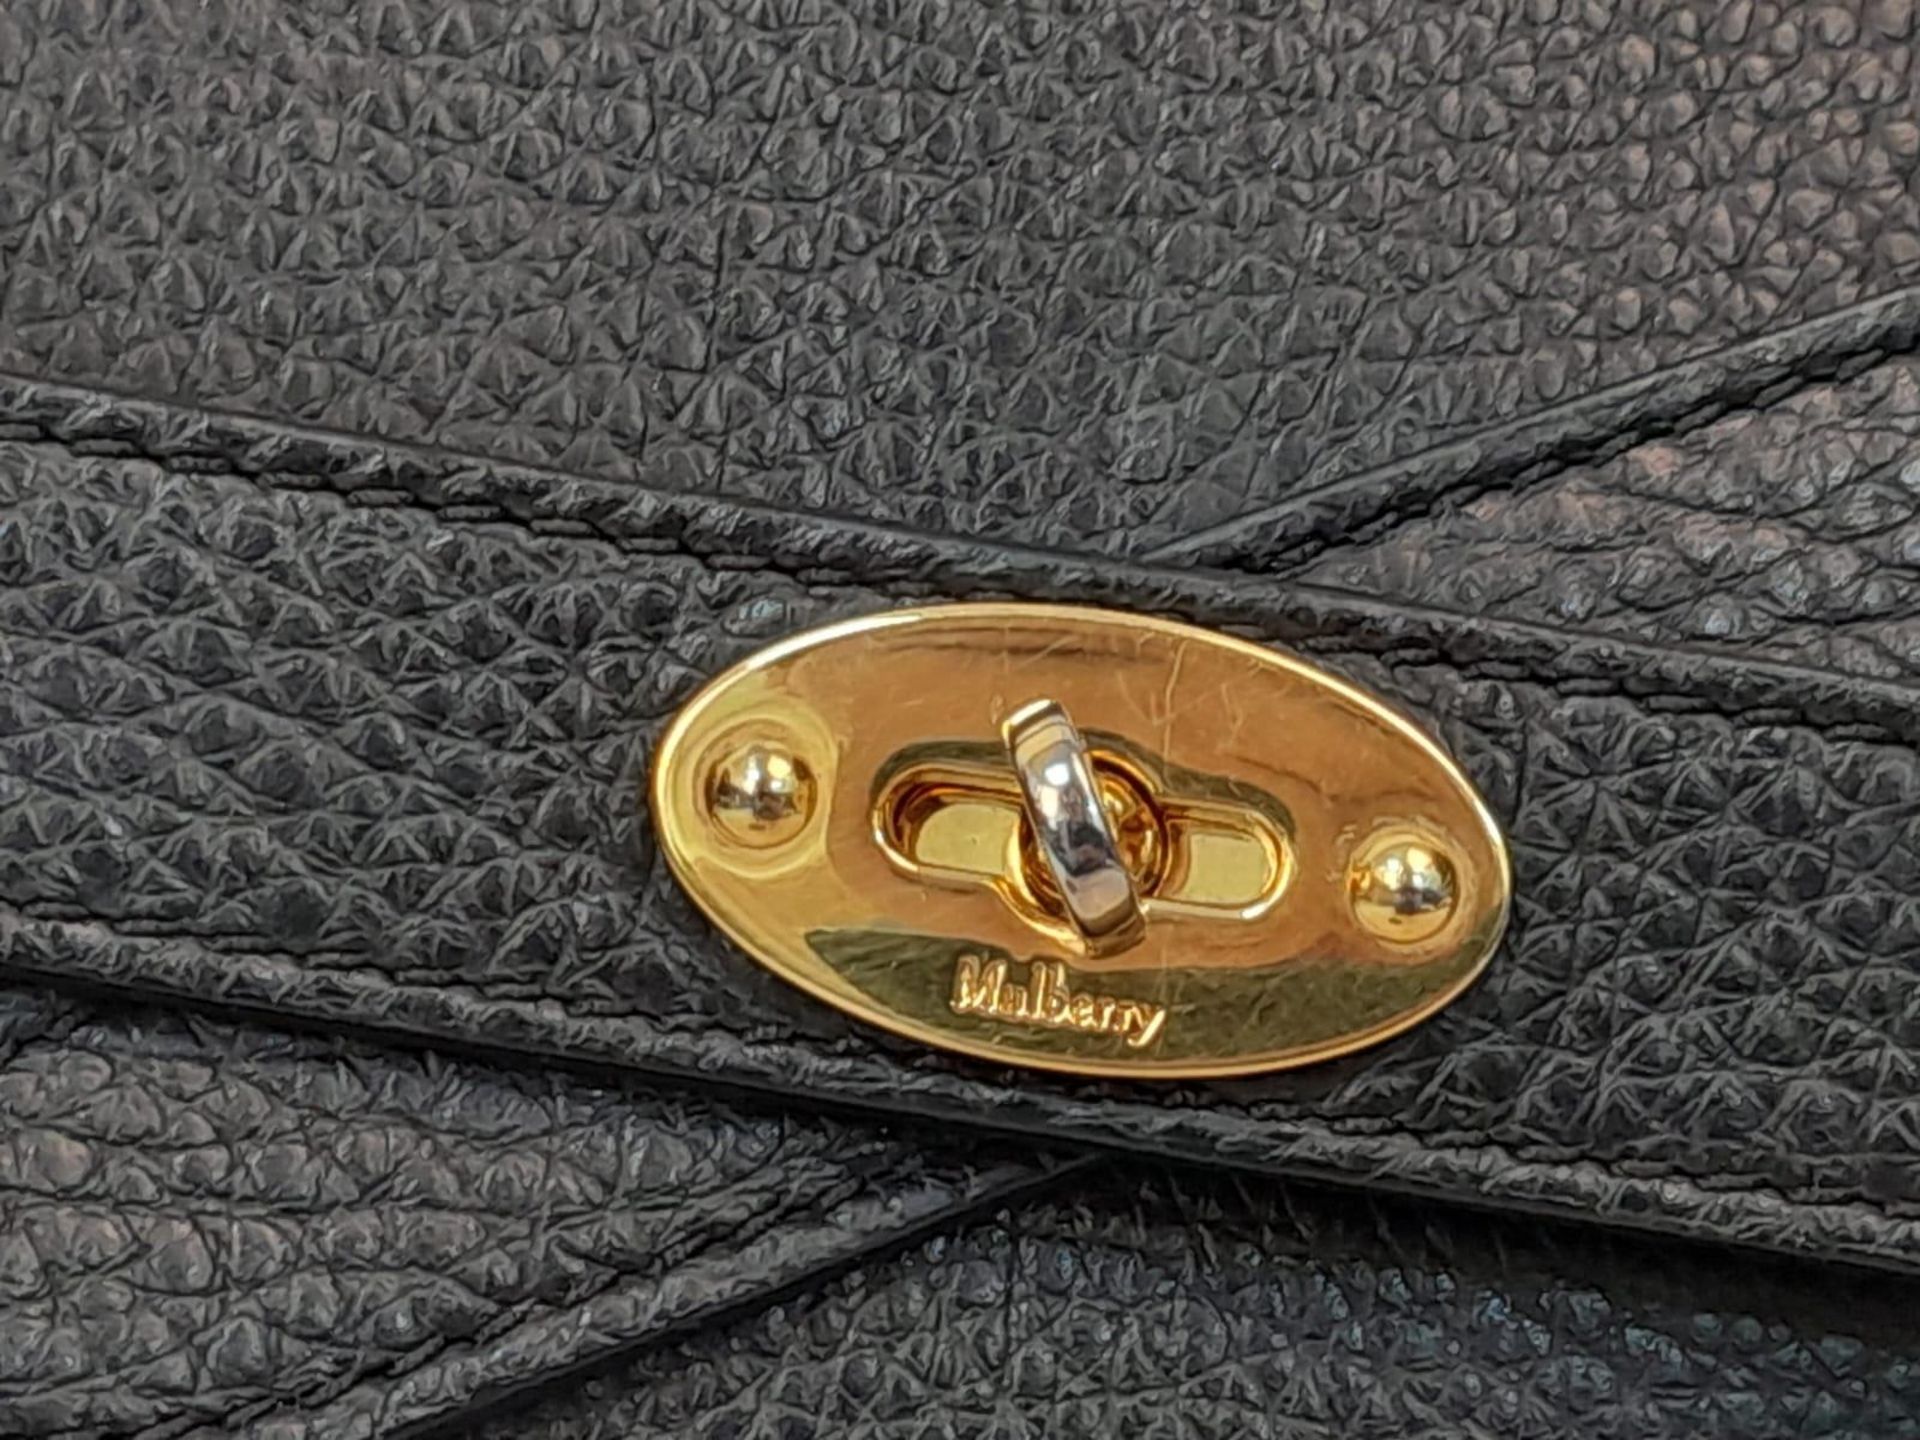 A Mulberry Bayswater Leather Handbag. Textured black leather exterior with gold tone hardware. - Image 5 of 9